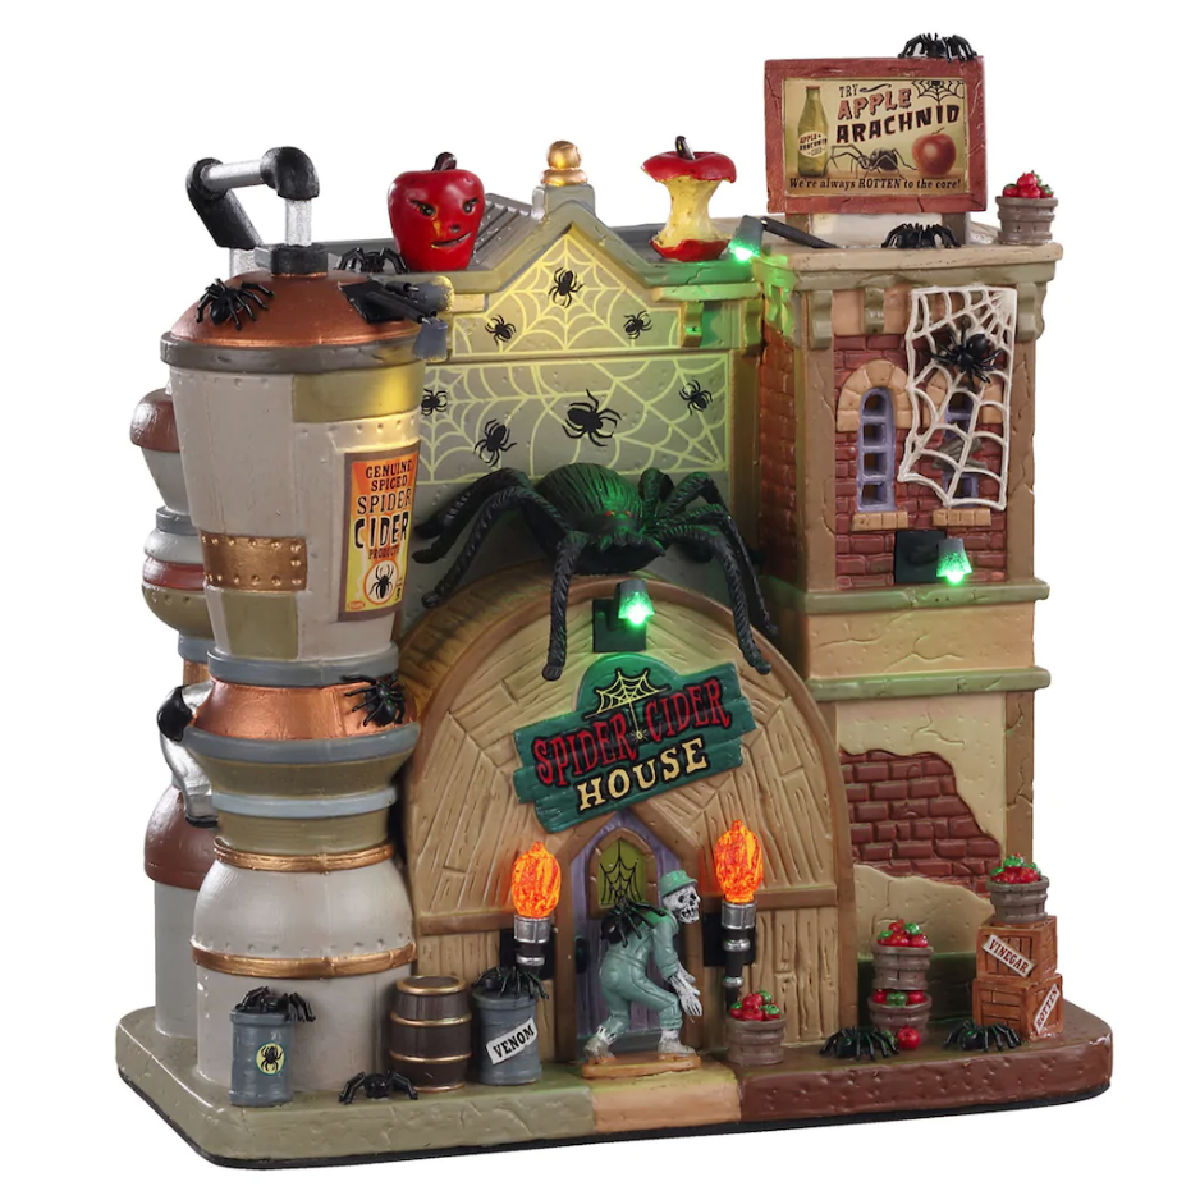 Lemax Spooky Town Spider Cider House 48.99 (30 off) Michaels